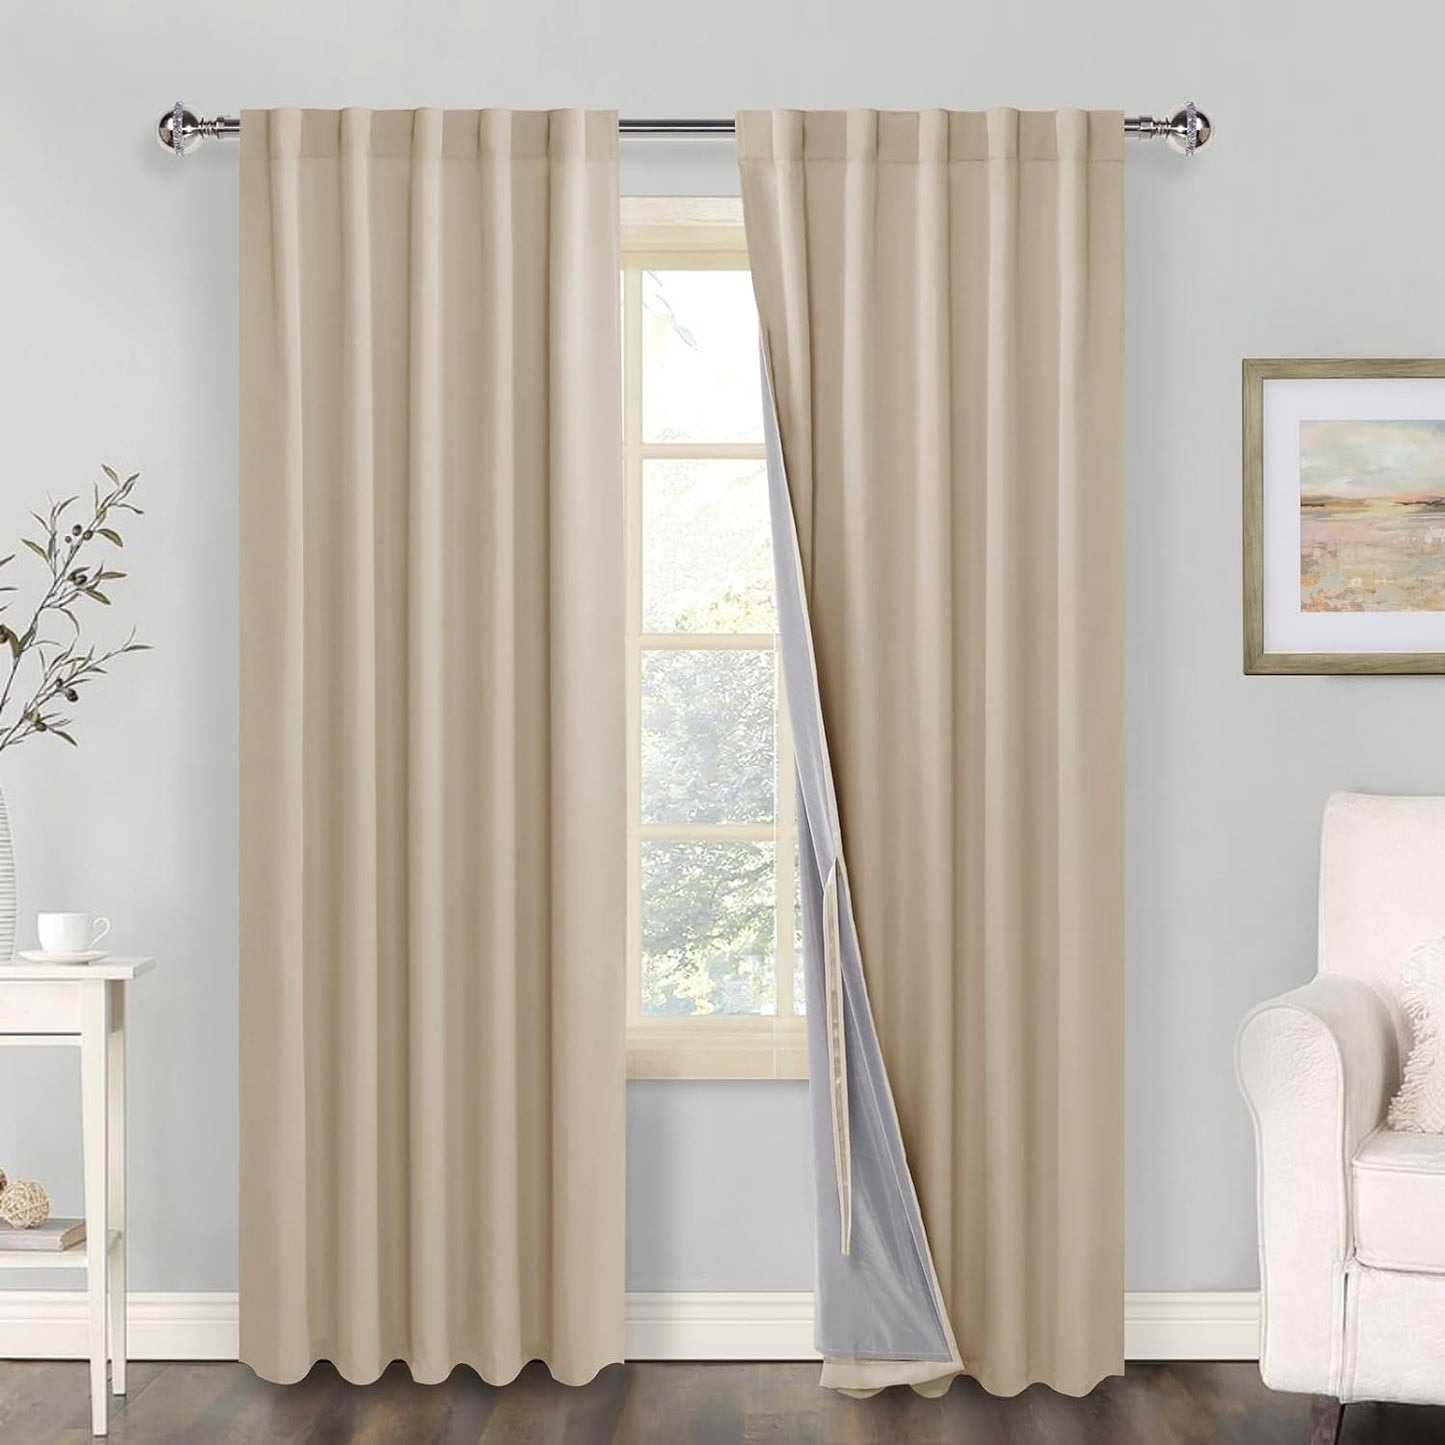 100% Blackout Curtains 2 Panels with Tiebacks- Heat and Full Light Blocking Window Treatment with Black Liner for Bedroom/Nursery, Rod Pocket & Back Tab，White, W52 X L84 Inches Long, Set of 2  XWZO Beige W42" X L84"|2 Panels 